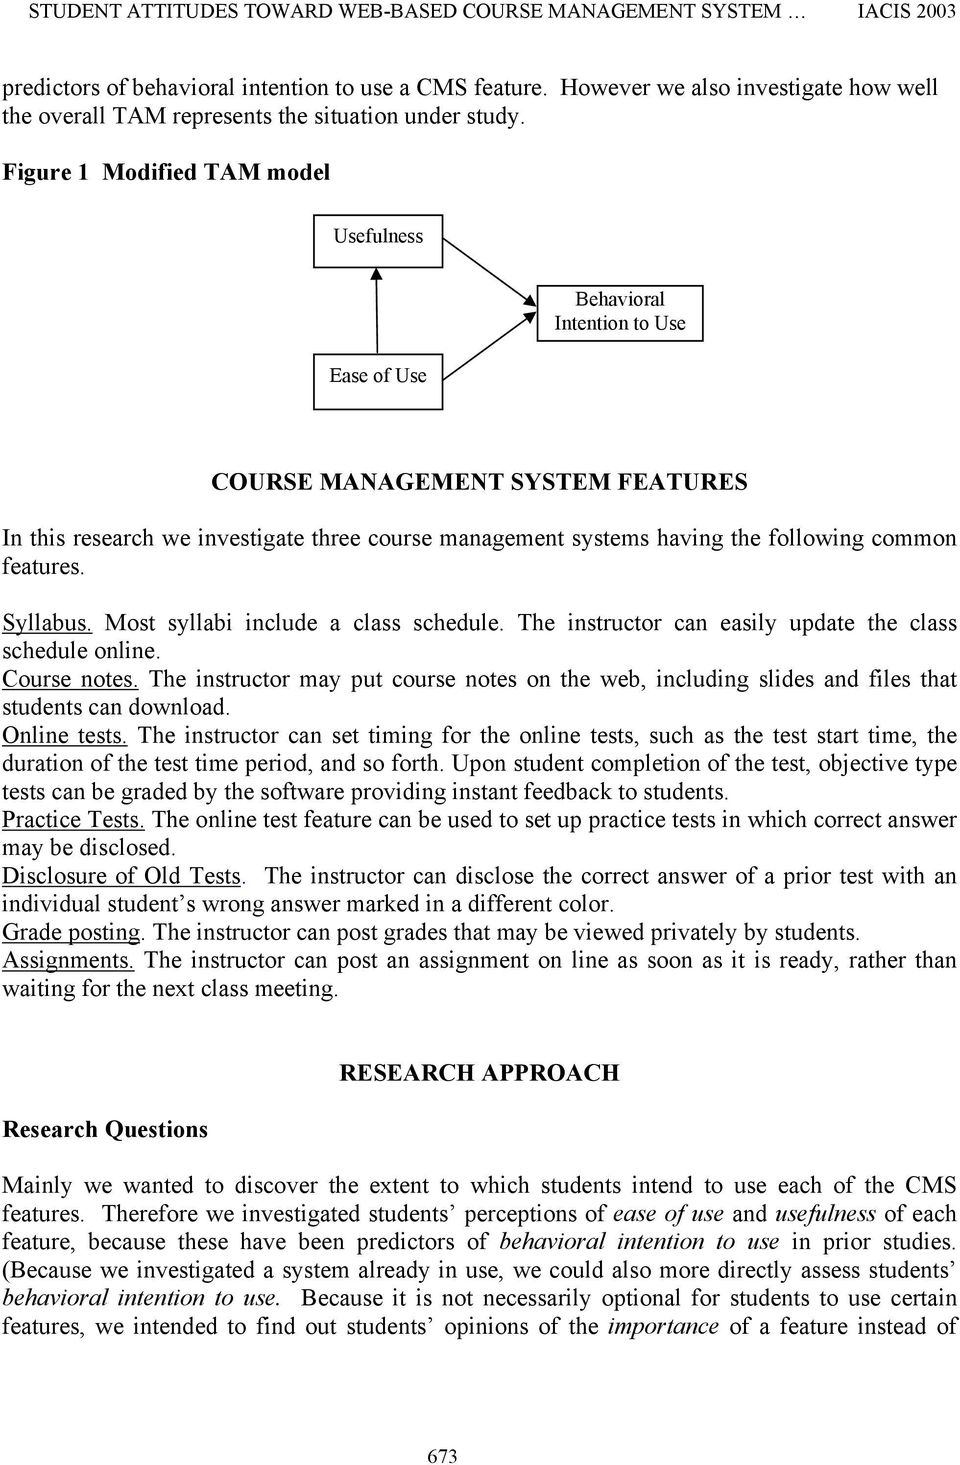 Figure 1 Modified TAM model Usefulness Ease of Use Behavioral Intention to Use COURSE MANAGEMENT SYSTEM FEATURES In this research we investigate three course management systems having the following